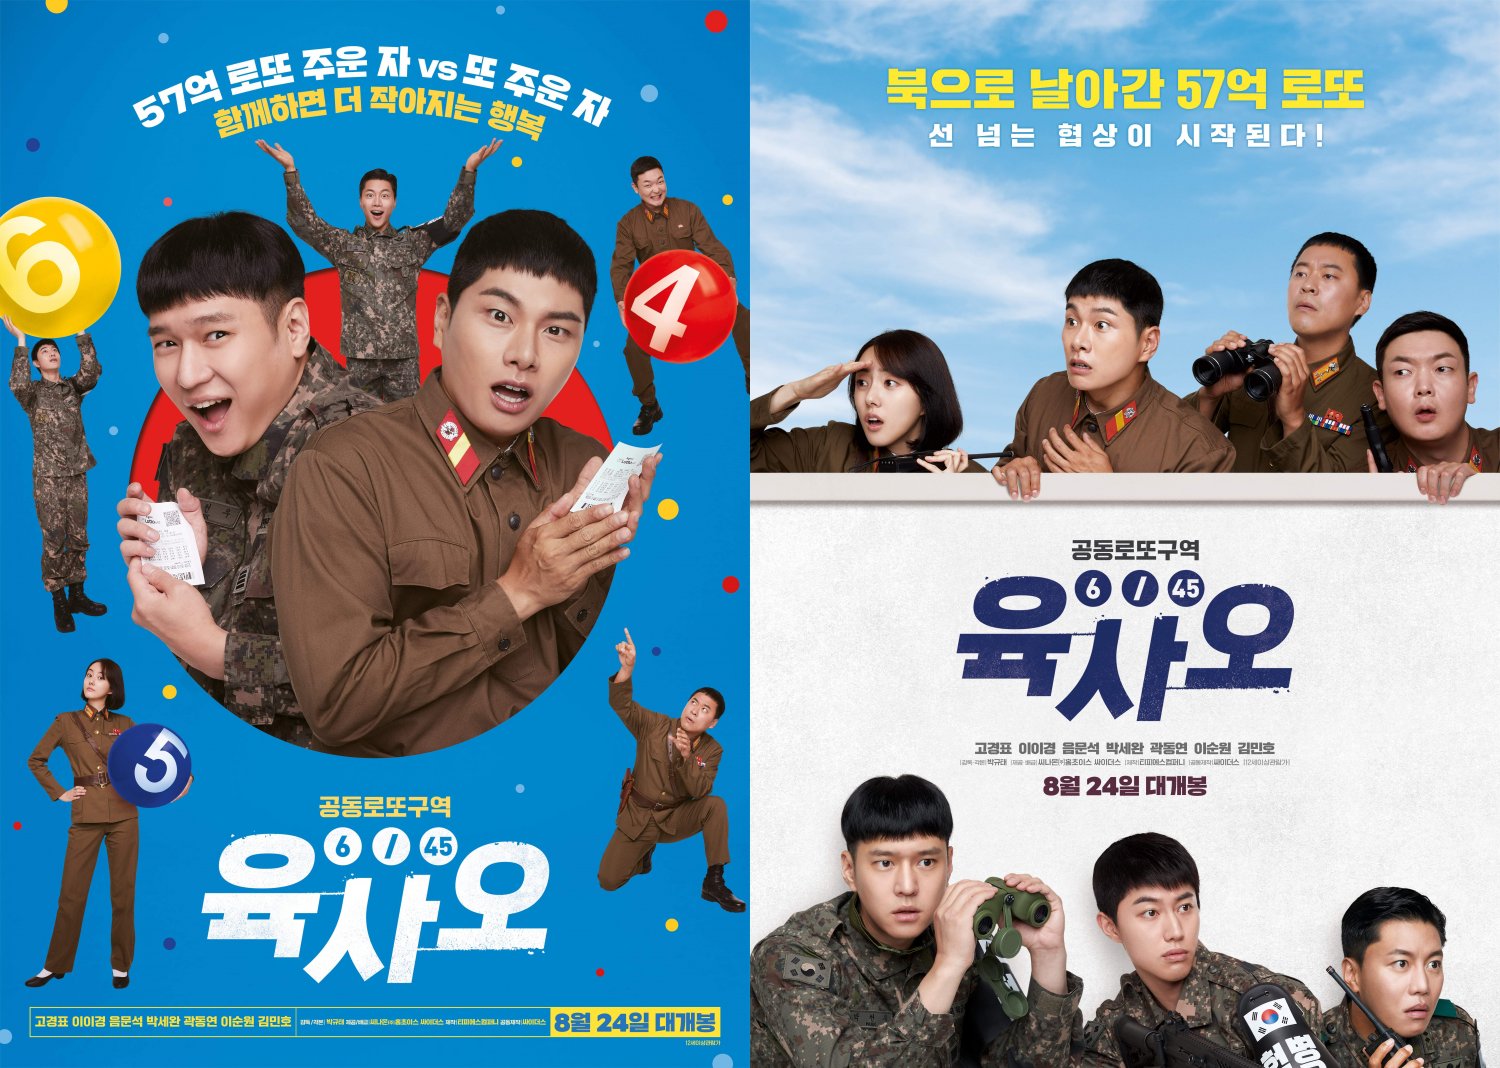 [Photos + Video] New Posters and Trailer Added for the Korean Movie '6/45' HanCinema